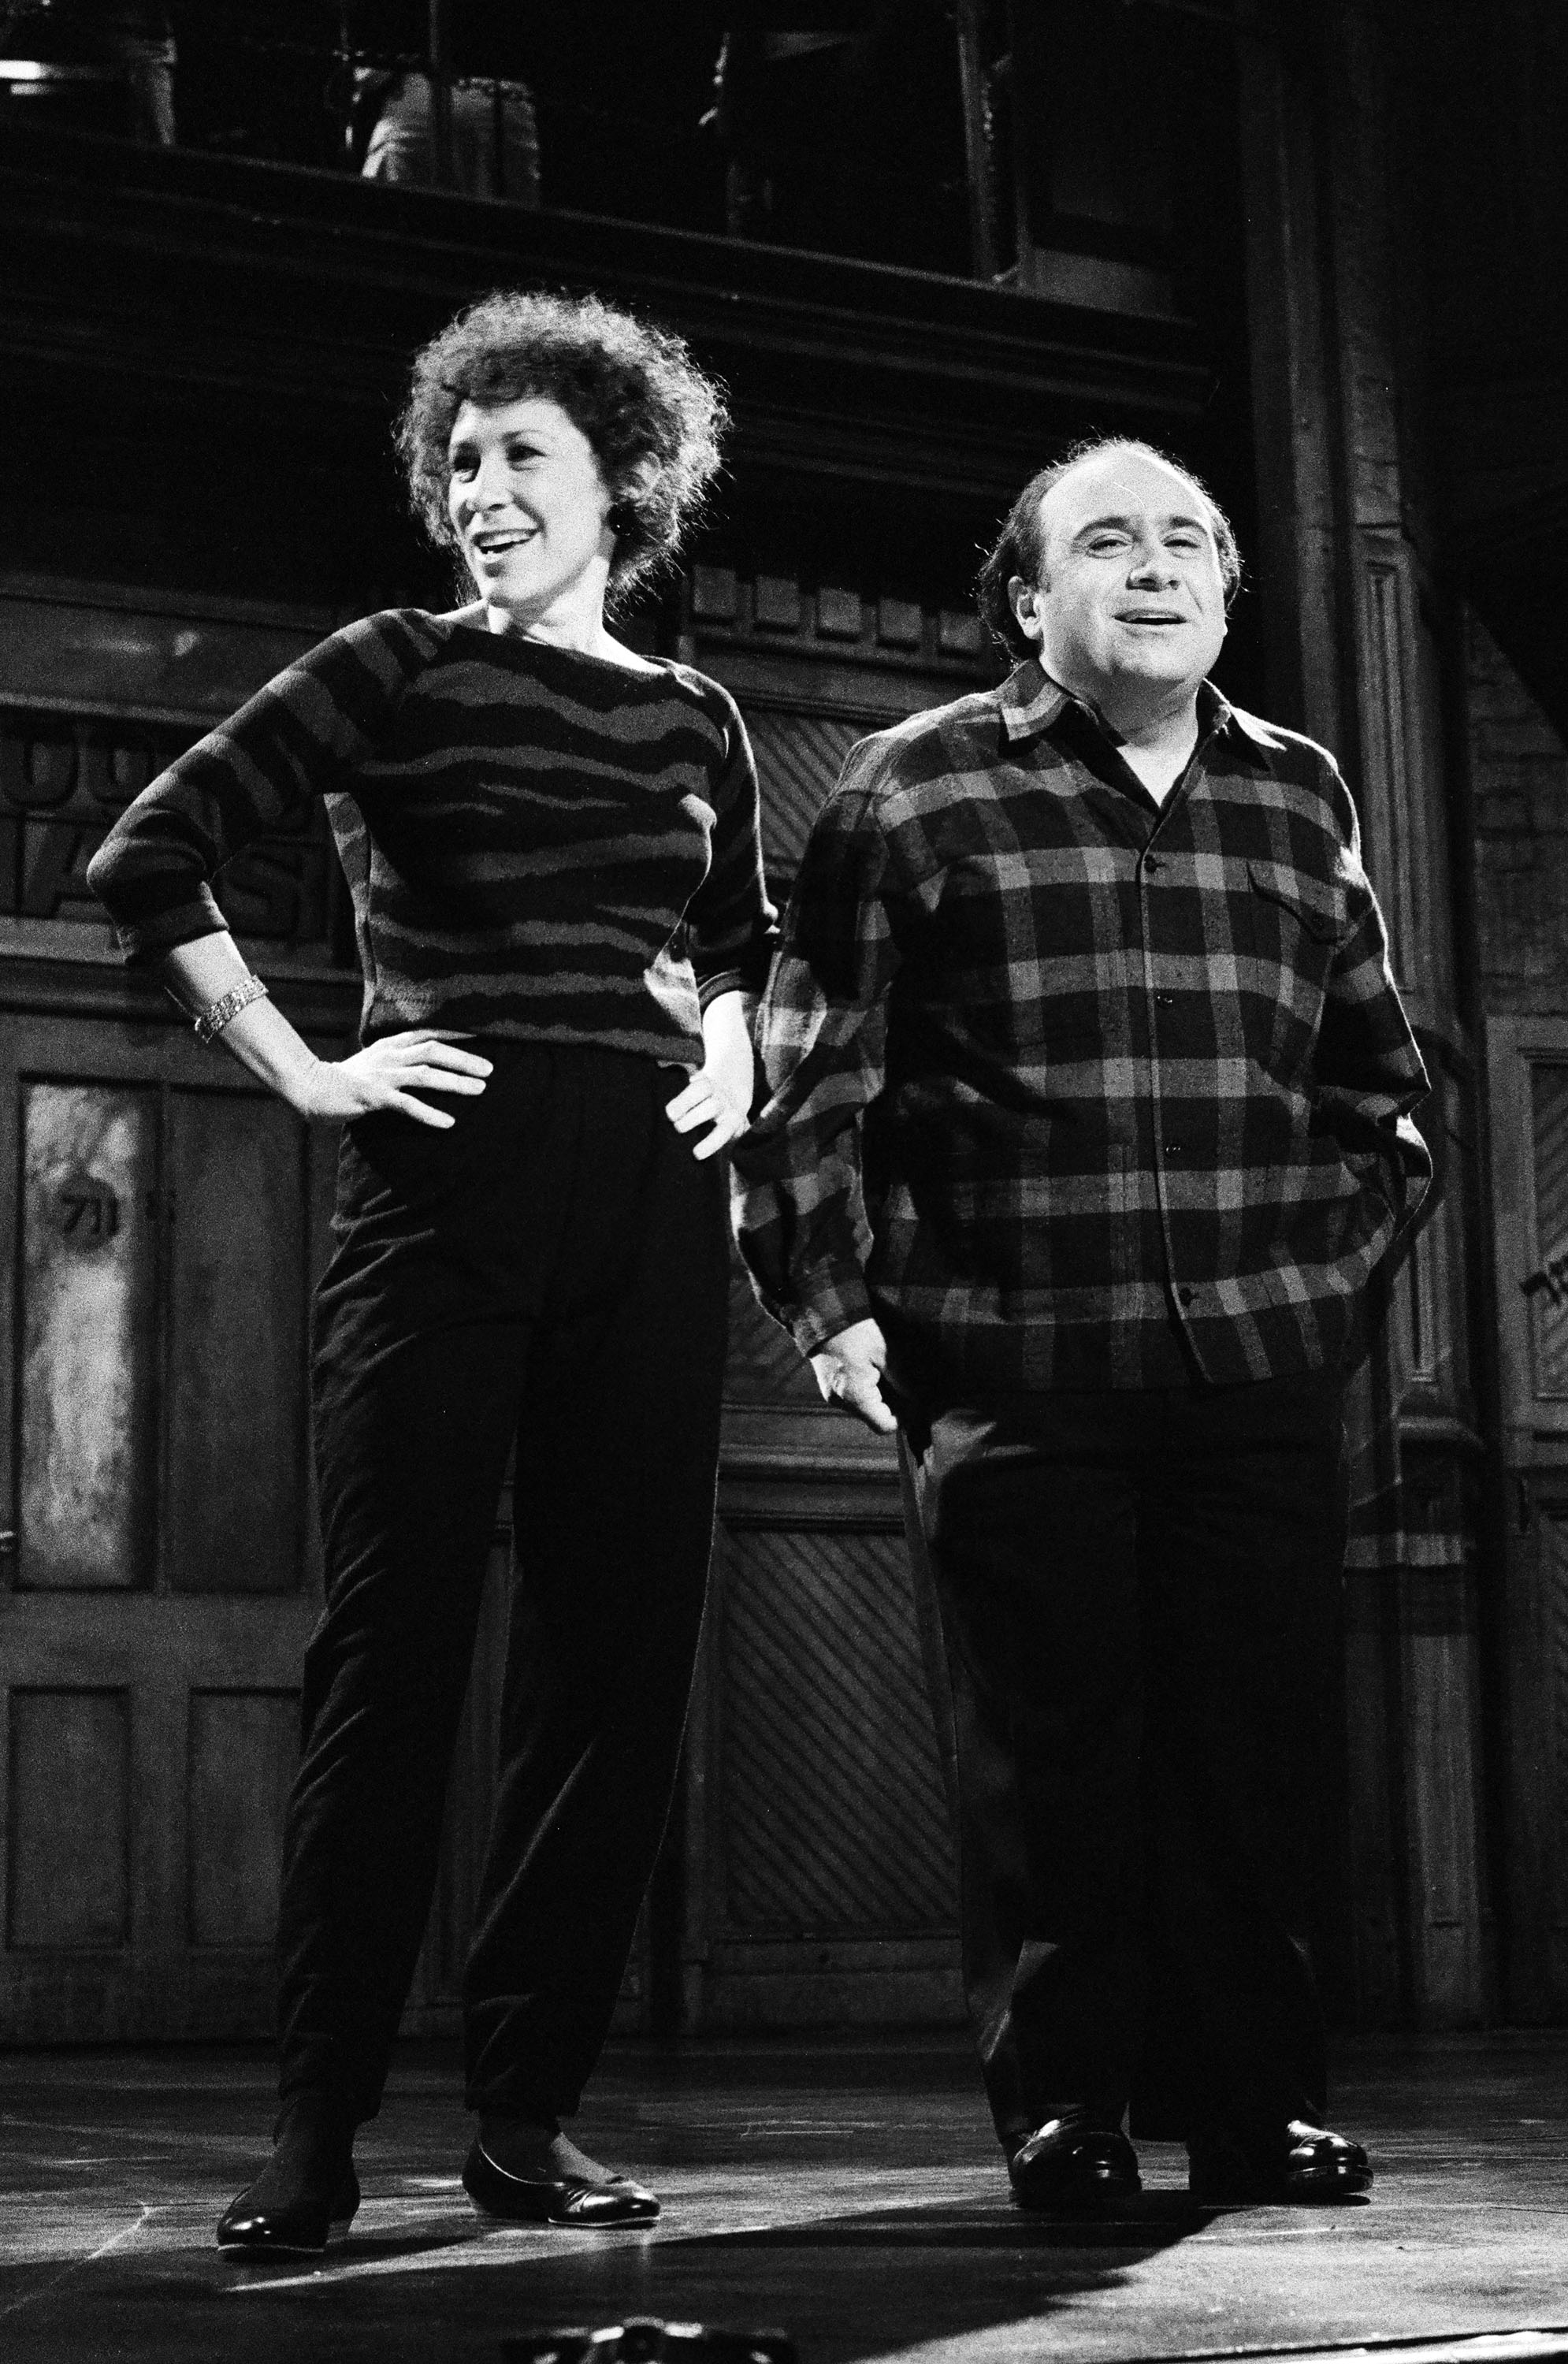 Rhea Perlman and Danny DeVito during the "Saturday Night Live" monologue on October 15, 1983. Photo: Getty Images